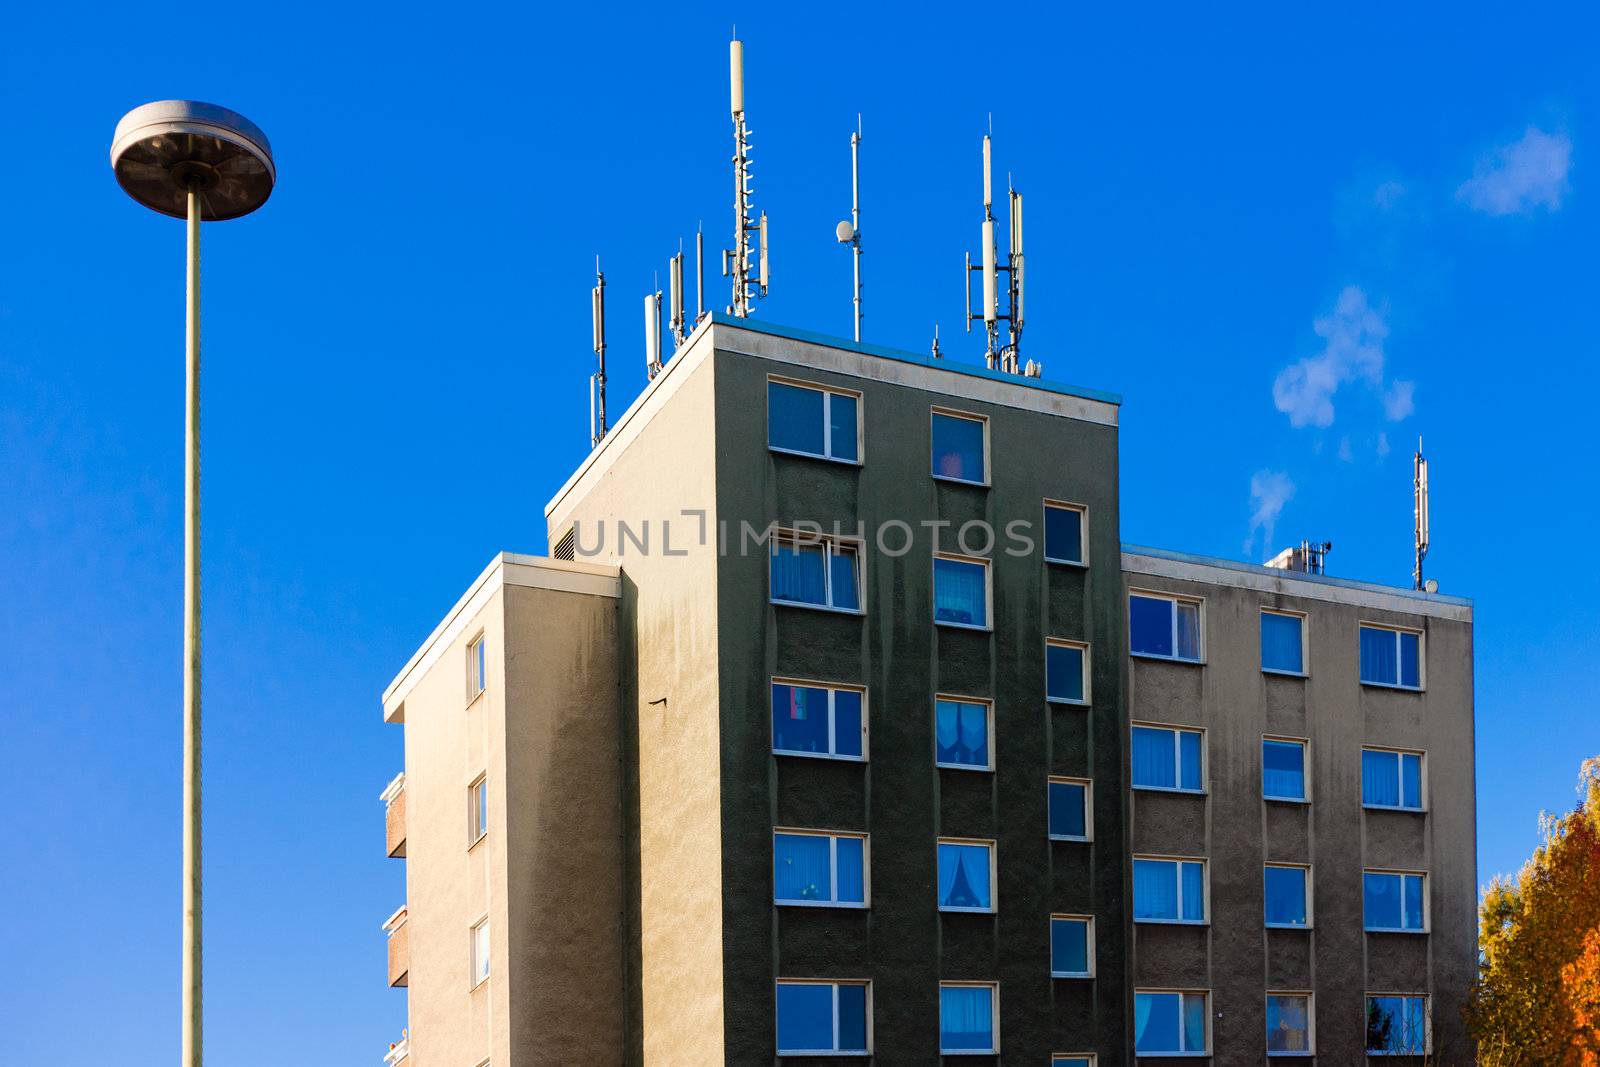 Antennas for cellphone service on building by PiLens